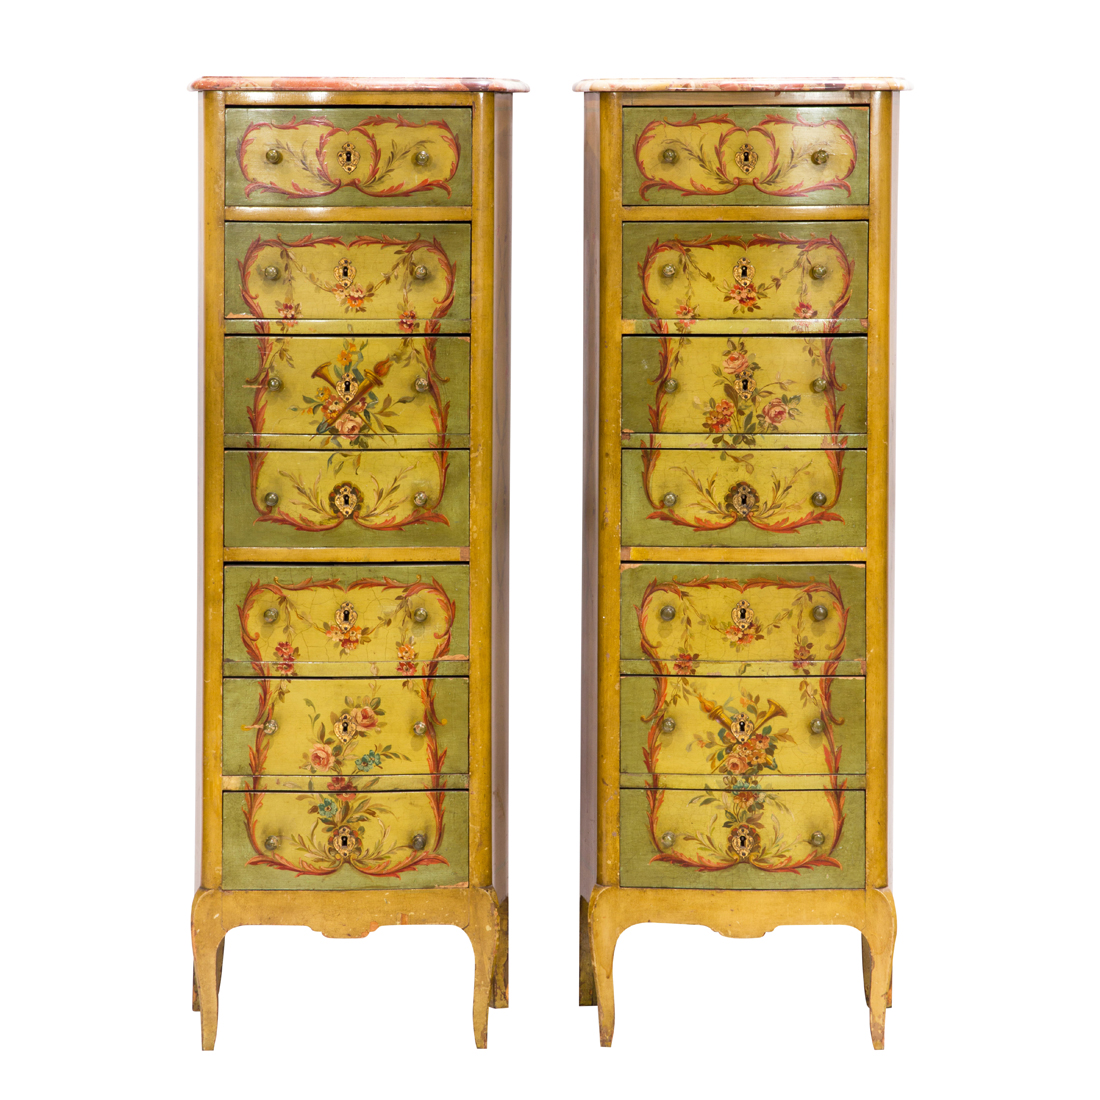 A PAIR OF FRENCH POLYCHROME DECORATED